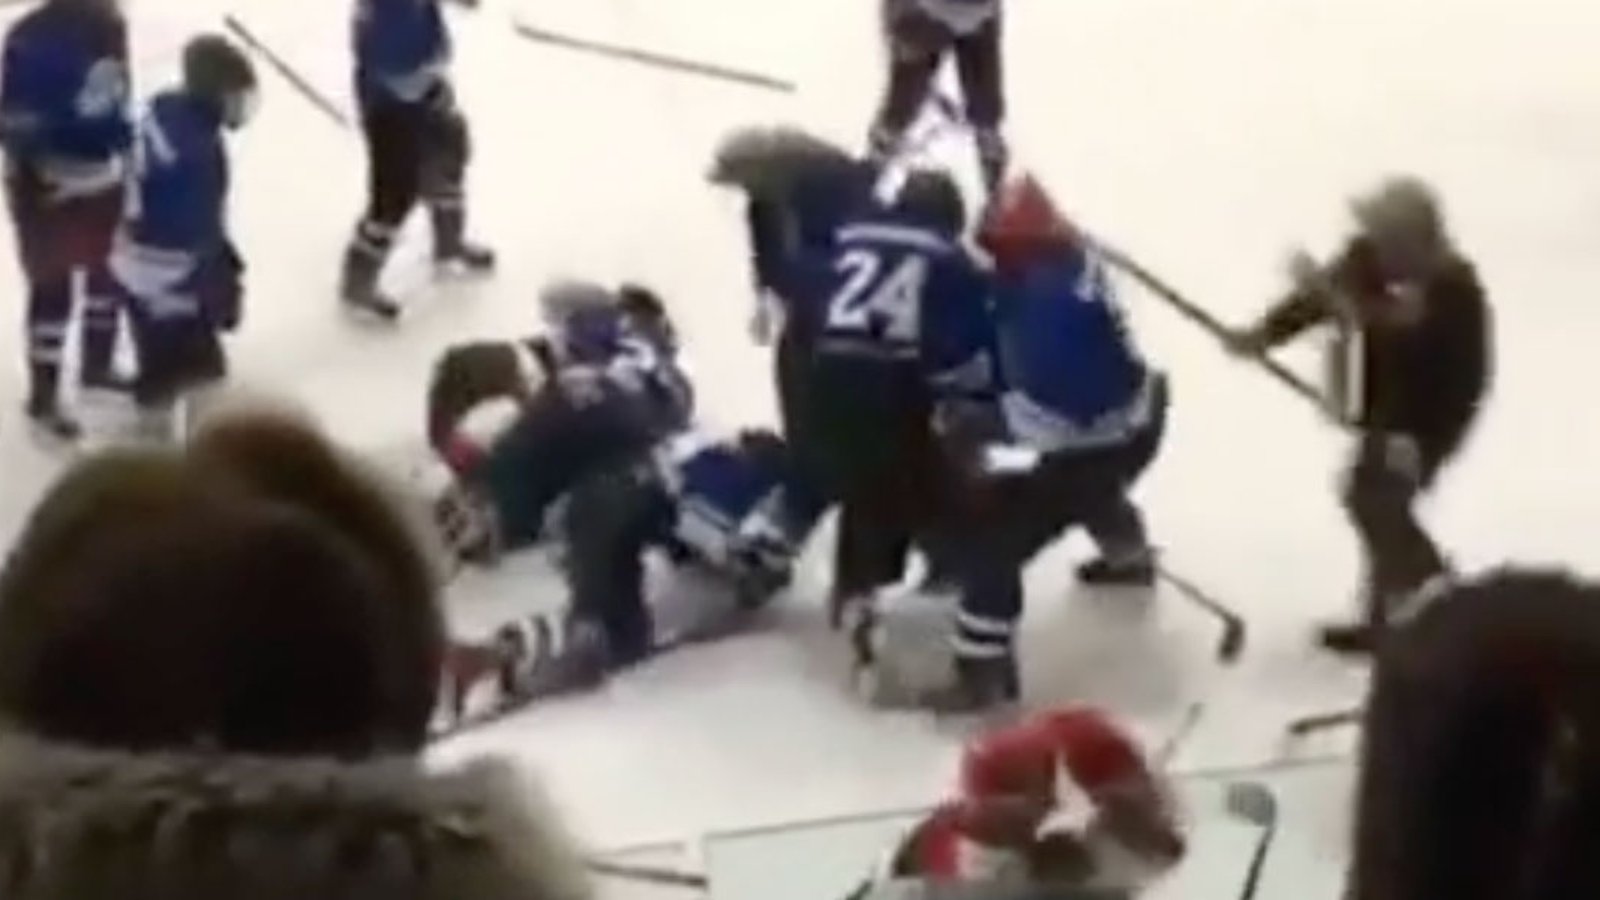 Coach attacks player with a stick then gets destroyed by one of his teammates! 